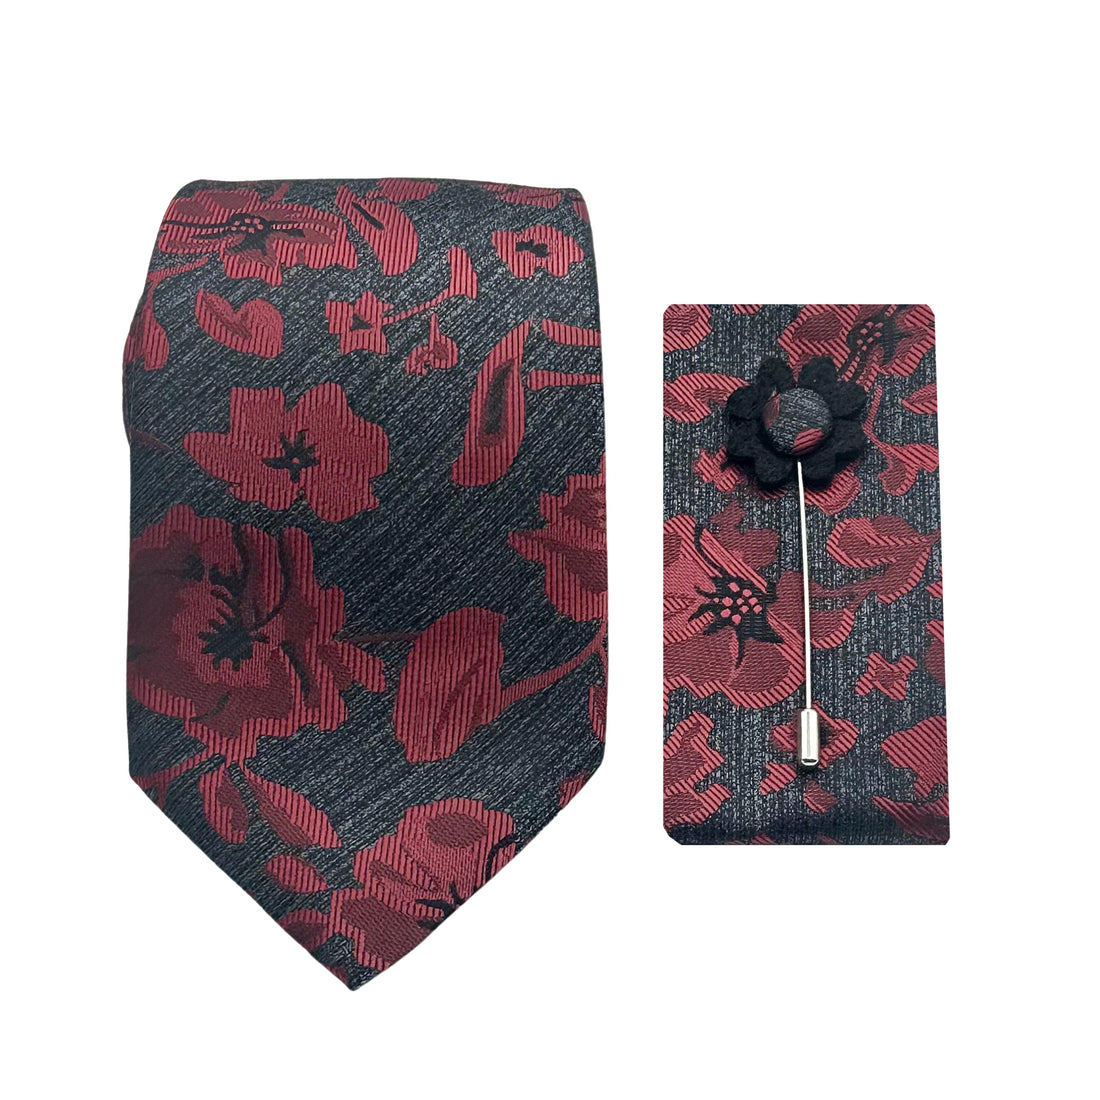 James Adelin Luxury Textured Floral 7.5cm Width Tie/Pocket Square/Lapel Pin Combo Set